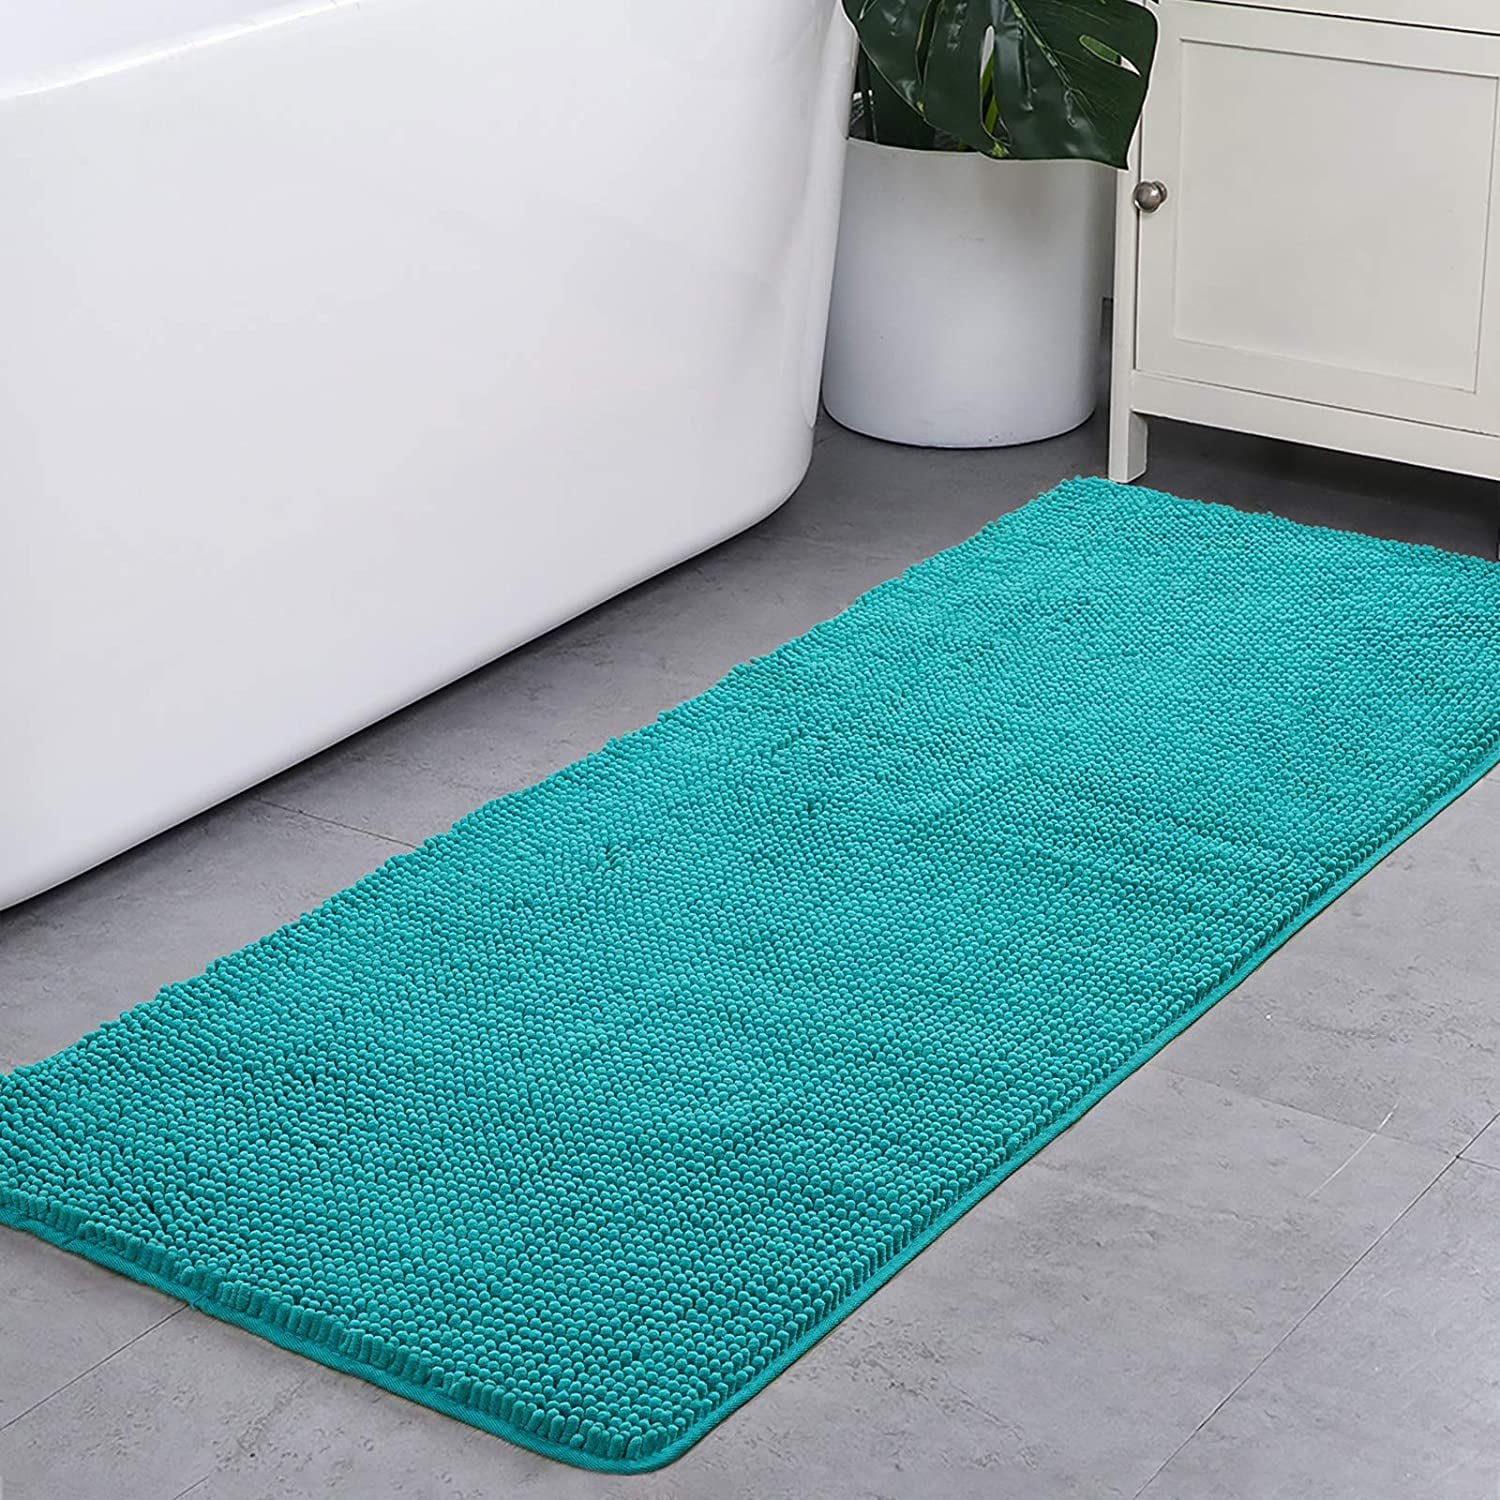 Bath Mat Cotton Luxury Large Runner Patterned Washable Anti Slip Absorbent Rug 